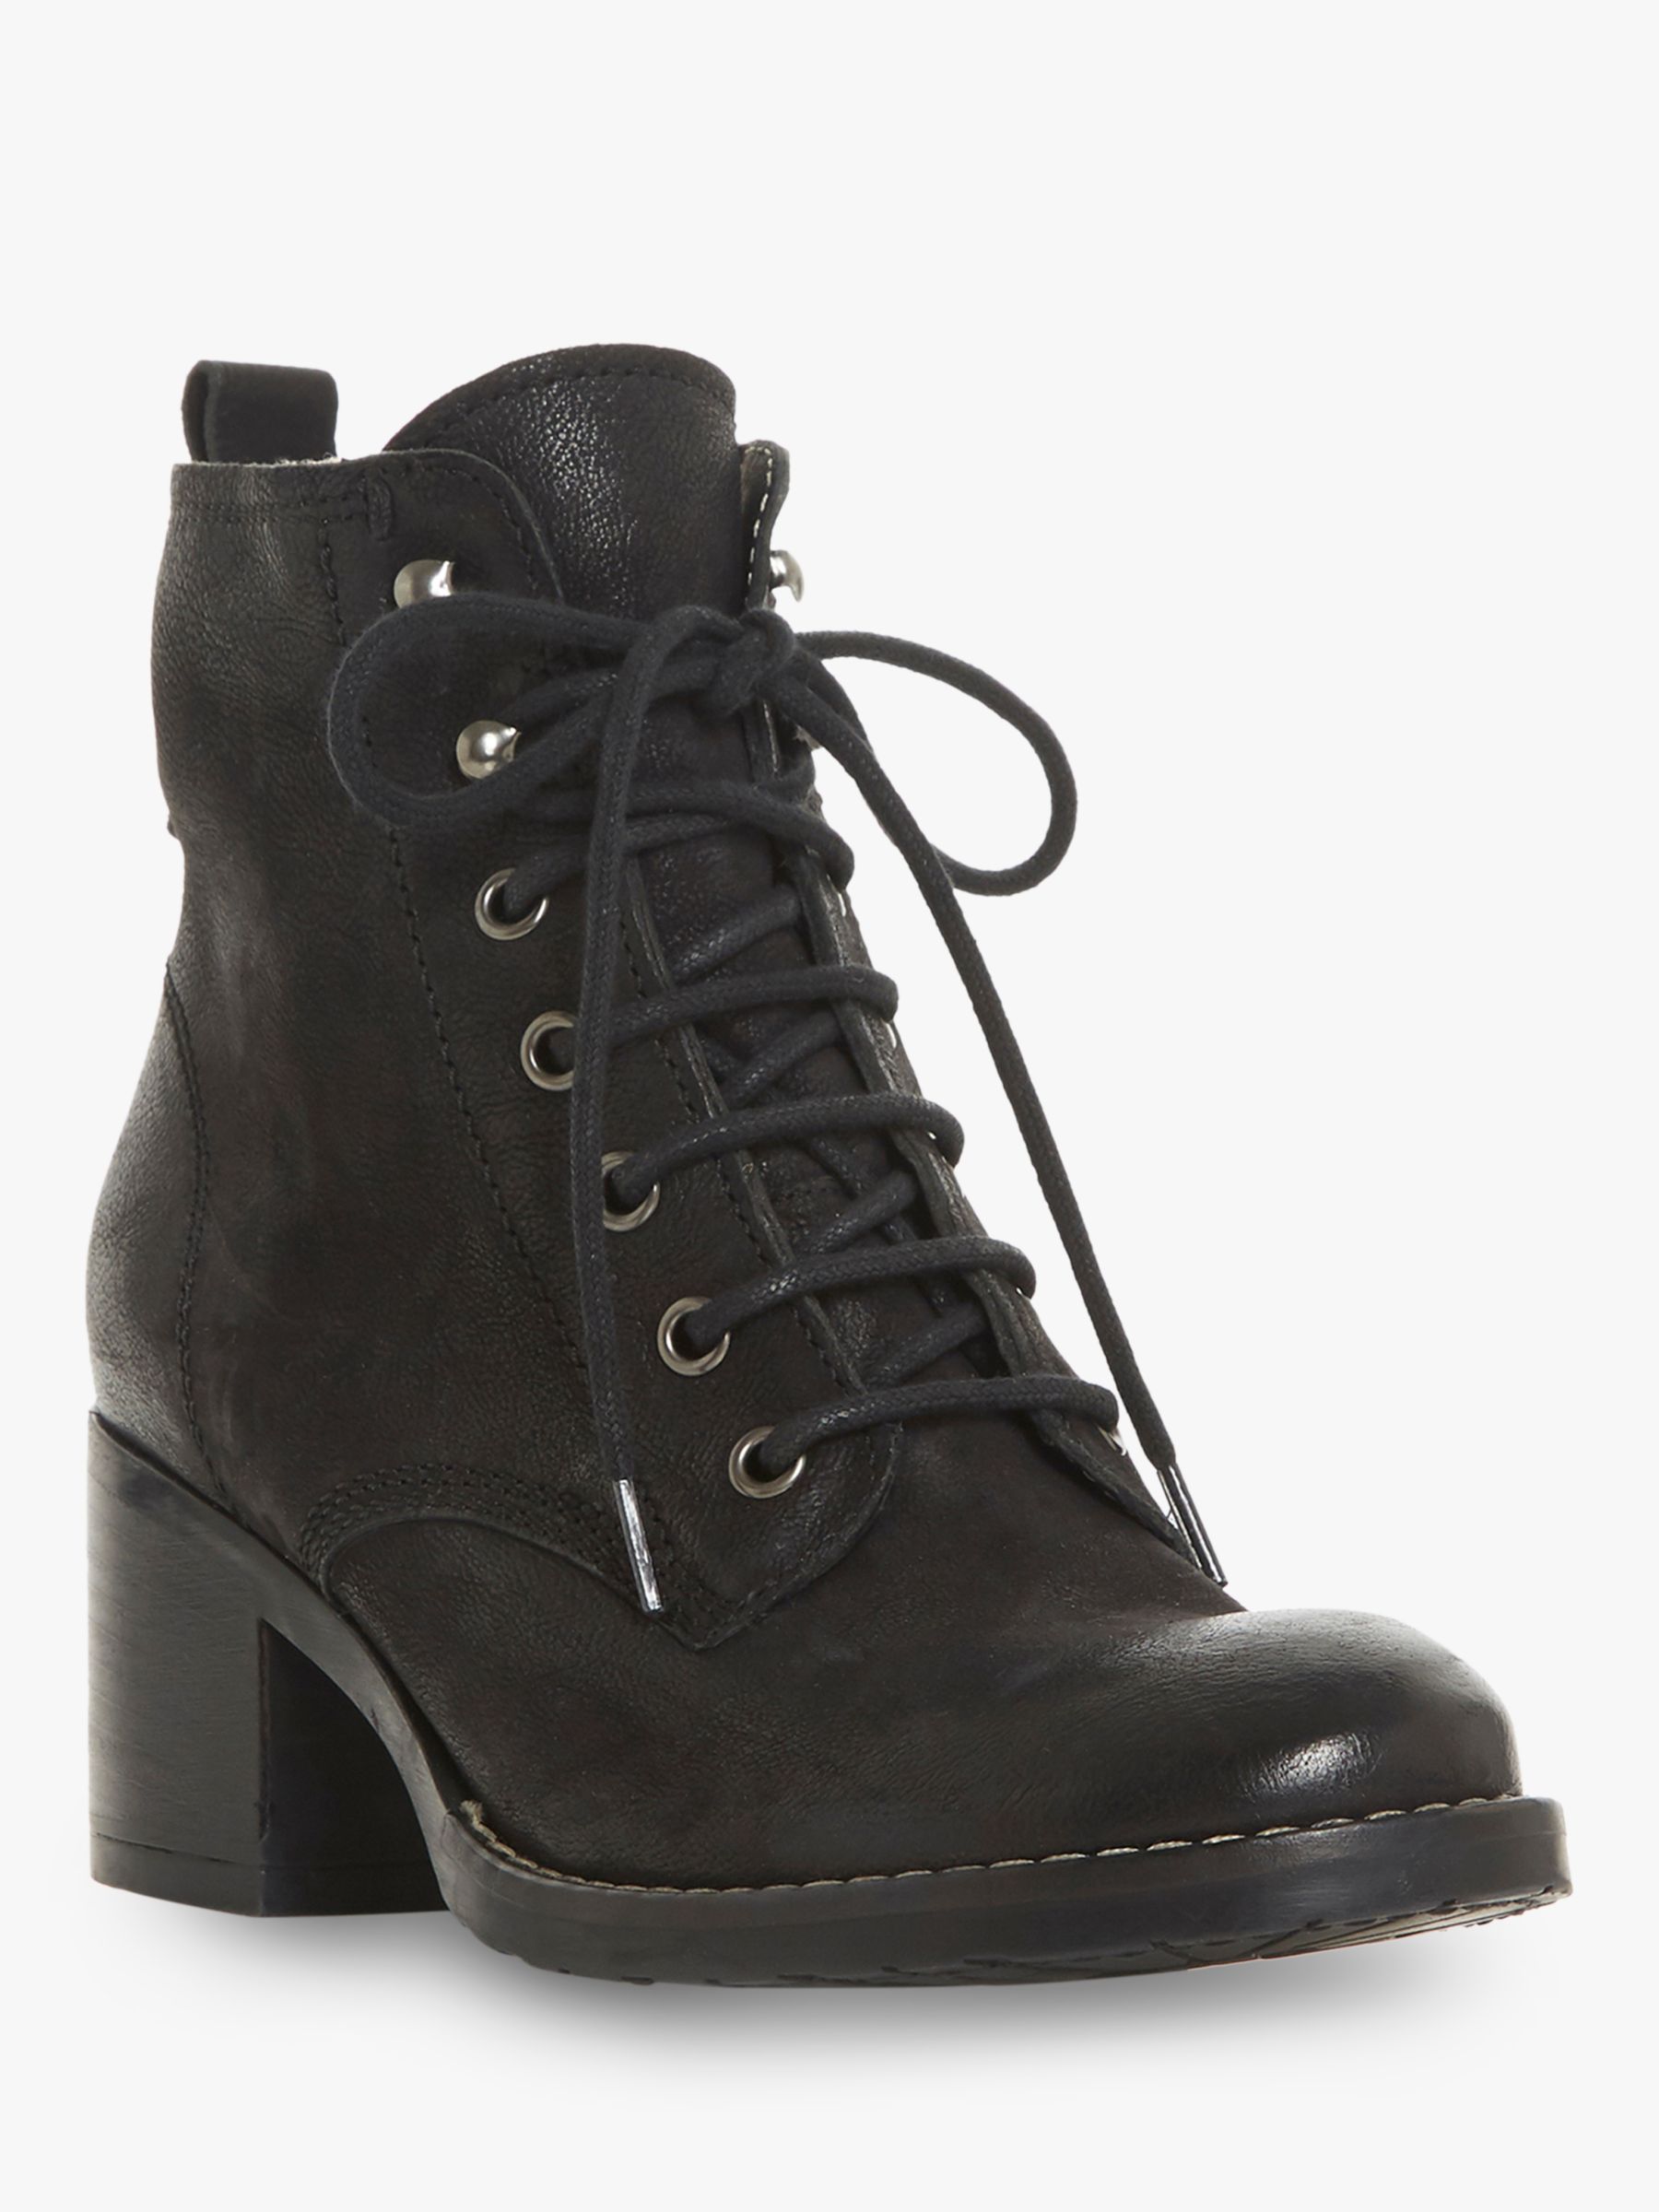 Dune Patsie D Leather Lace Up Ankle Boots, Black Nubuck at John Lewis & Partners